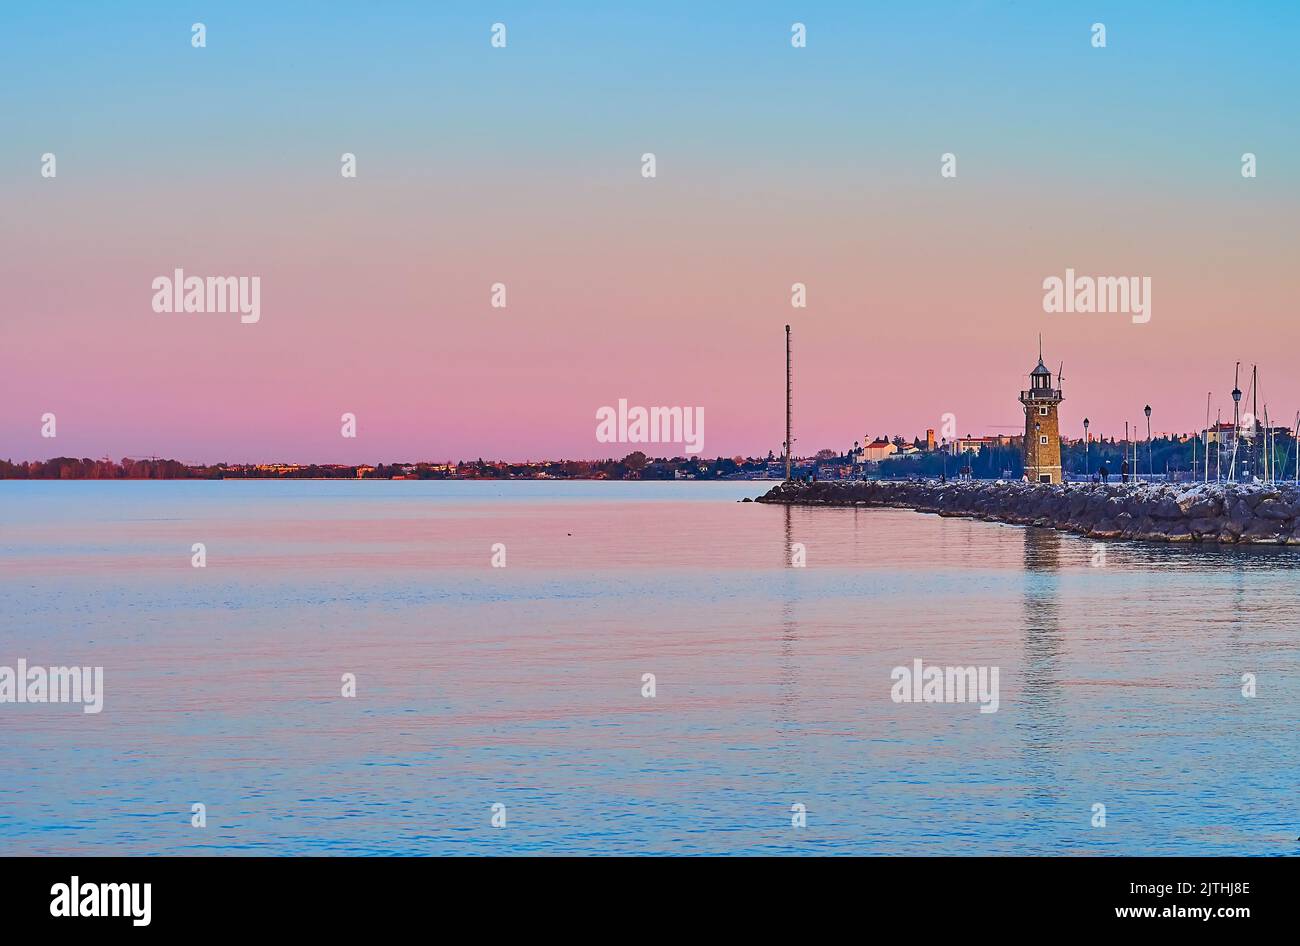 The bright purple dusk on Lake Garda with a view on the old stone lighthouse at the entry of the Porto Vecchio (Old Port), Desenzano del Garda, Italy Stock Photo